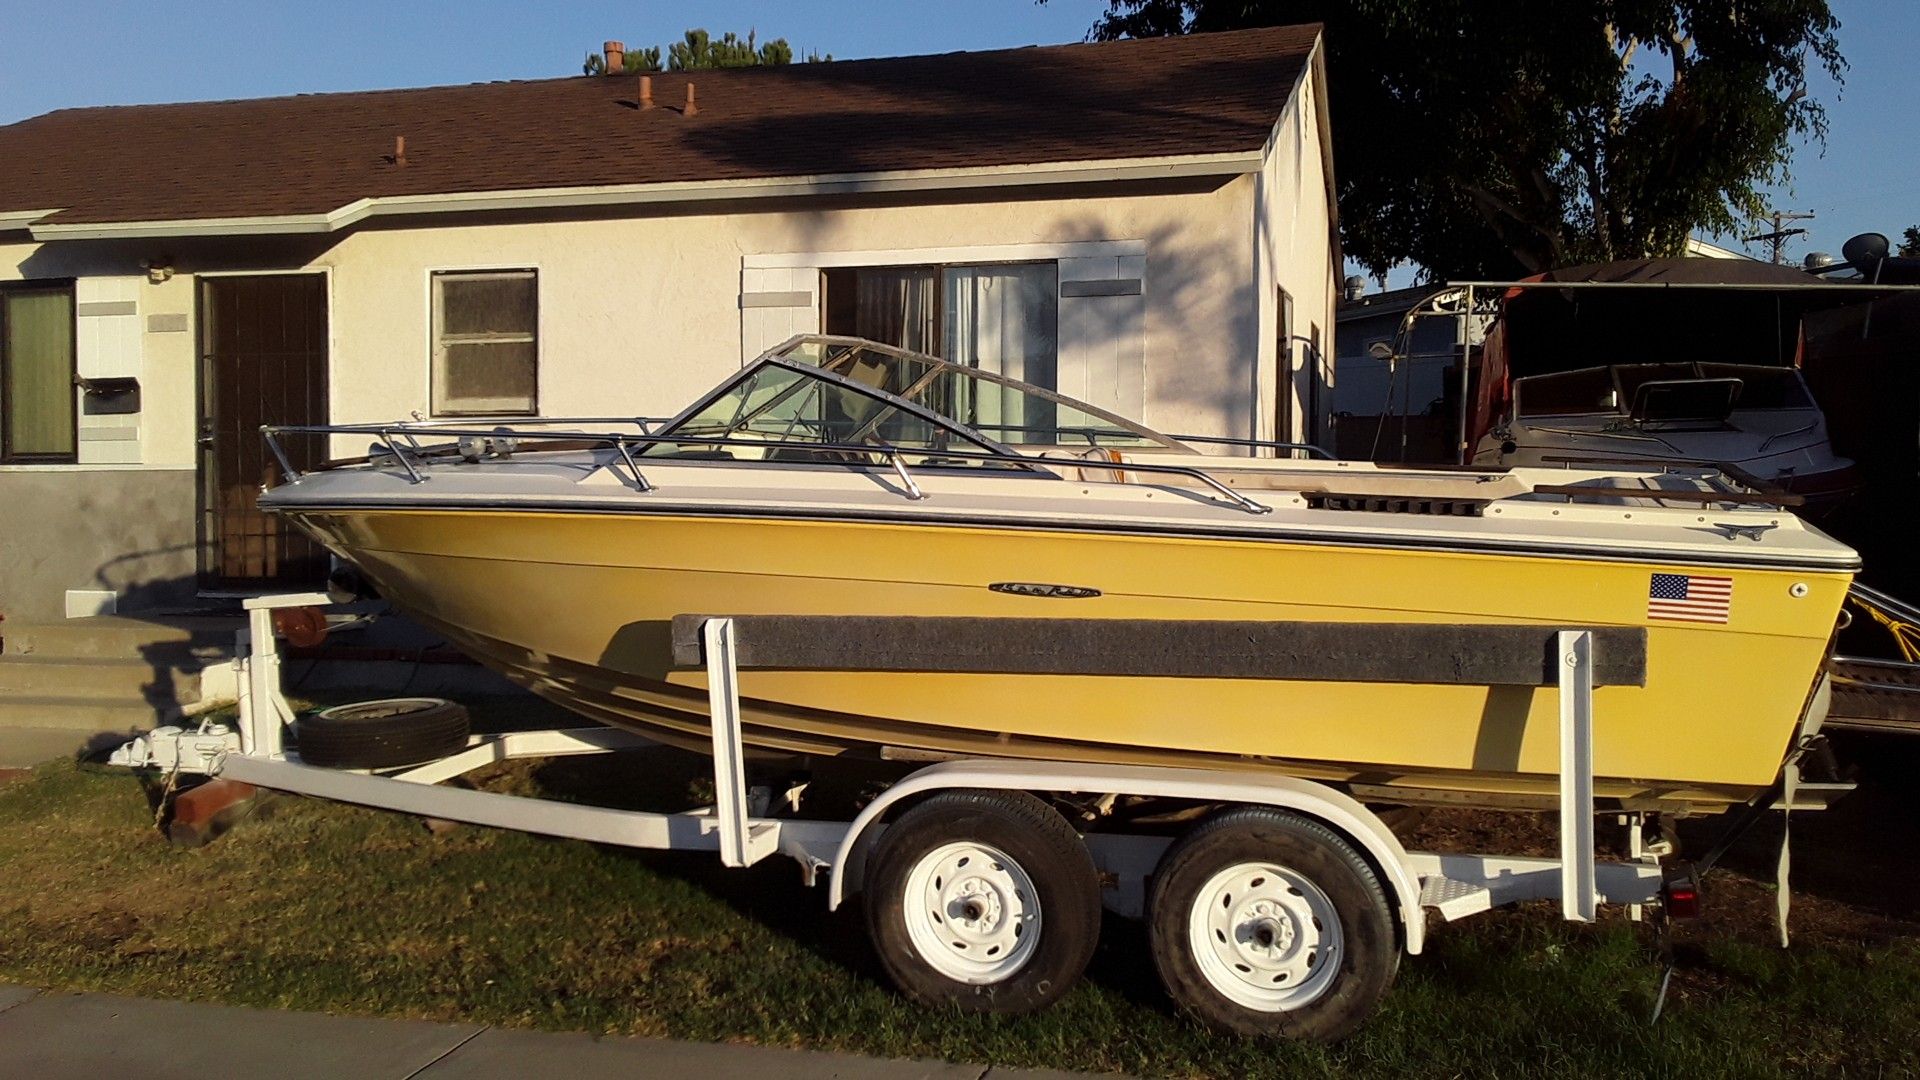 Project SeaRay new trailer